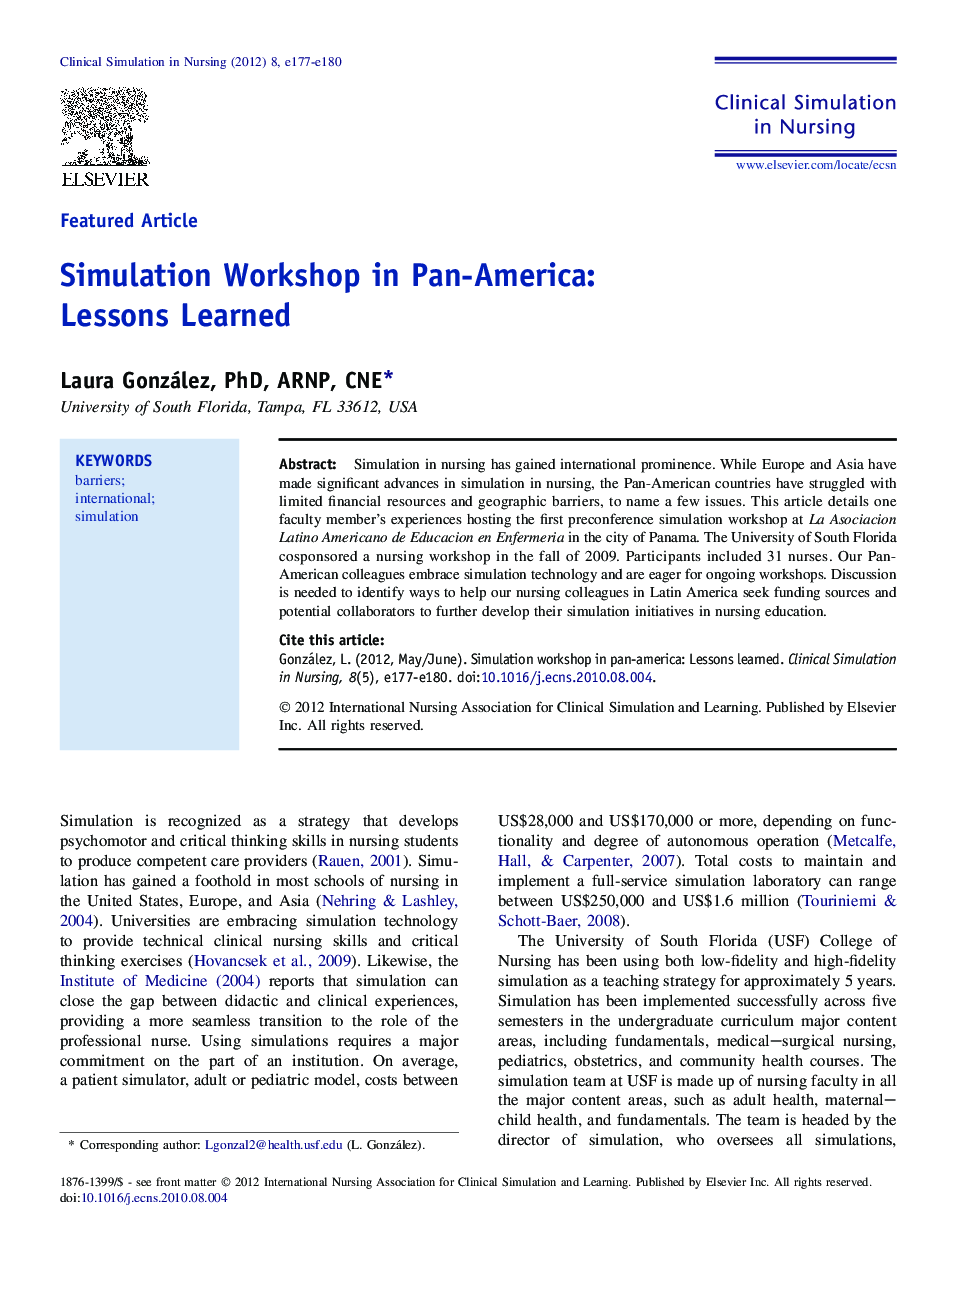 Simulation Workshop in Pan-America: Lessons Learned